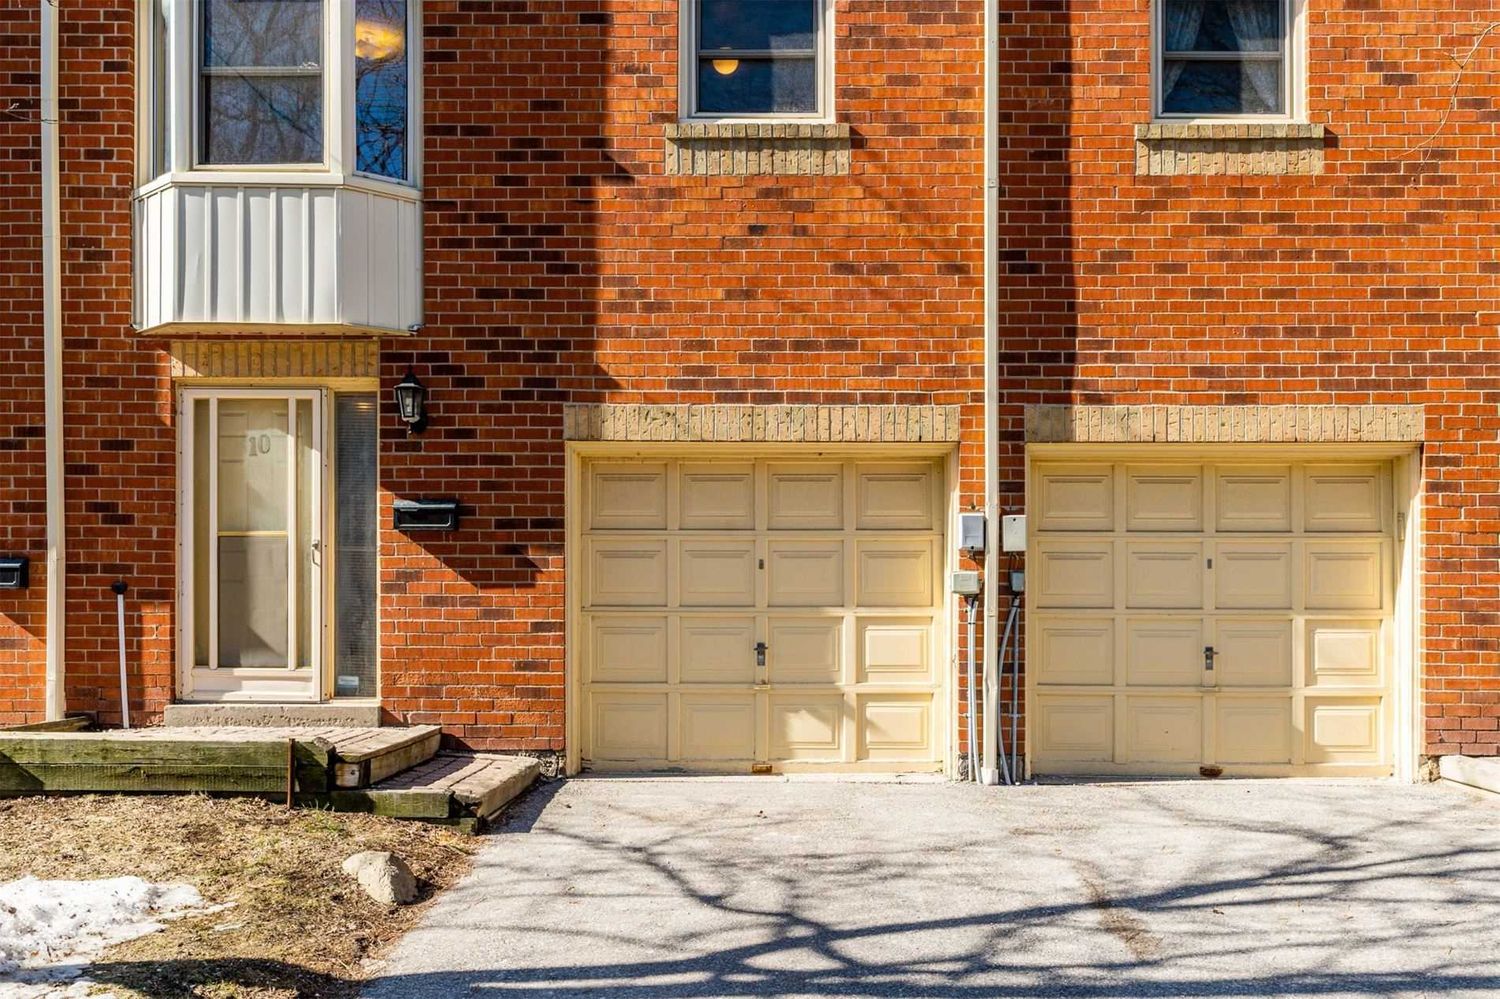 10-36 Cardwell Avenue. Cardwell Avenue Townhomes is located in  Scarborough, Toronto - image #2 of 2